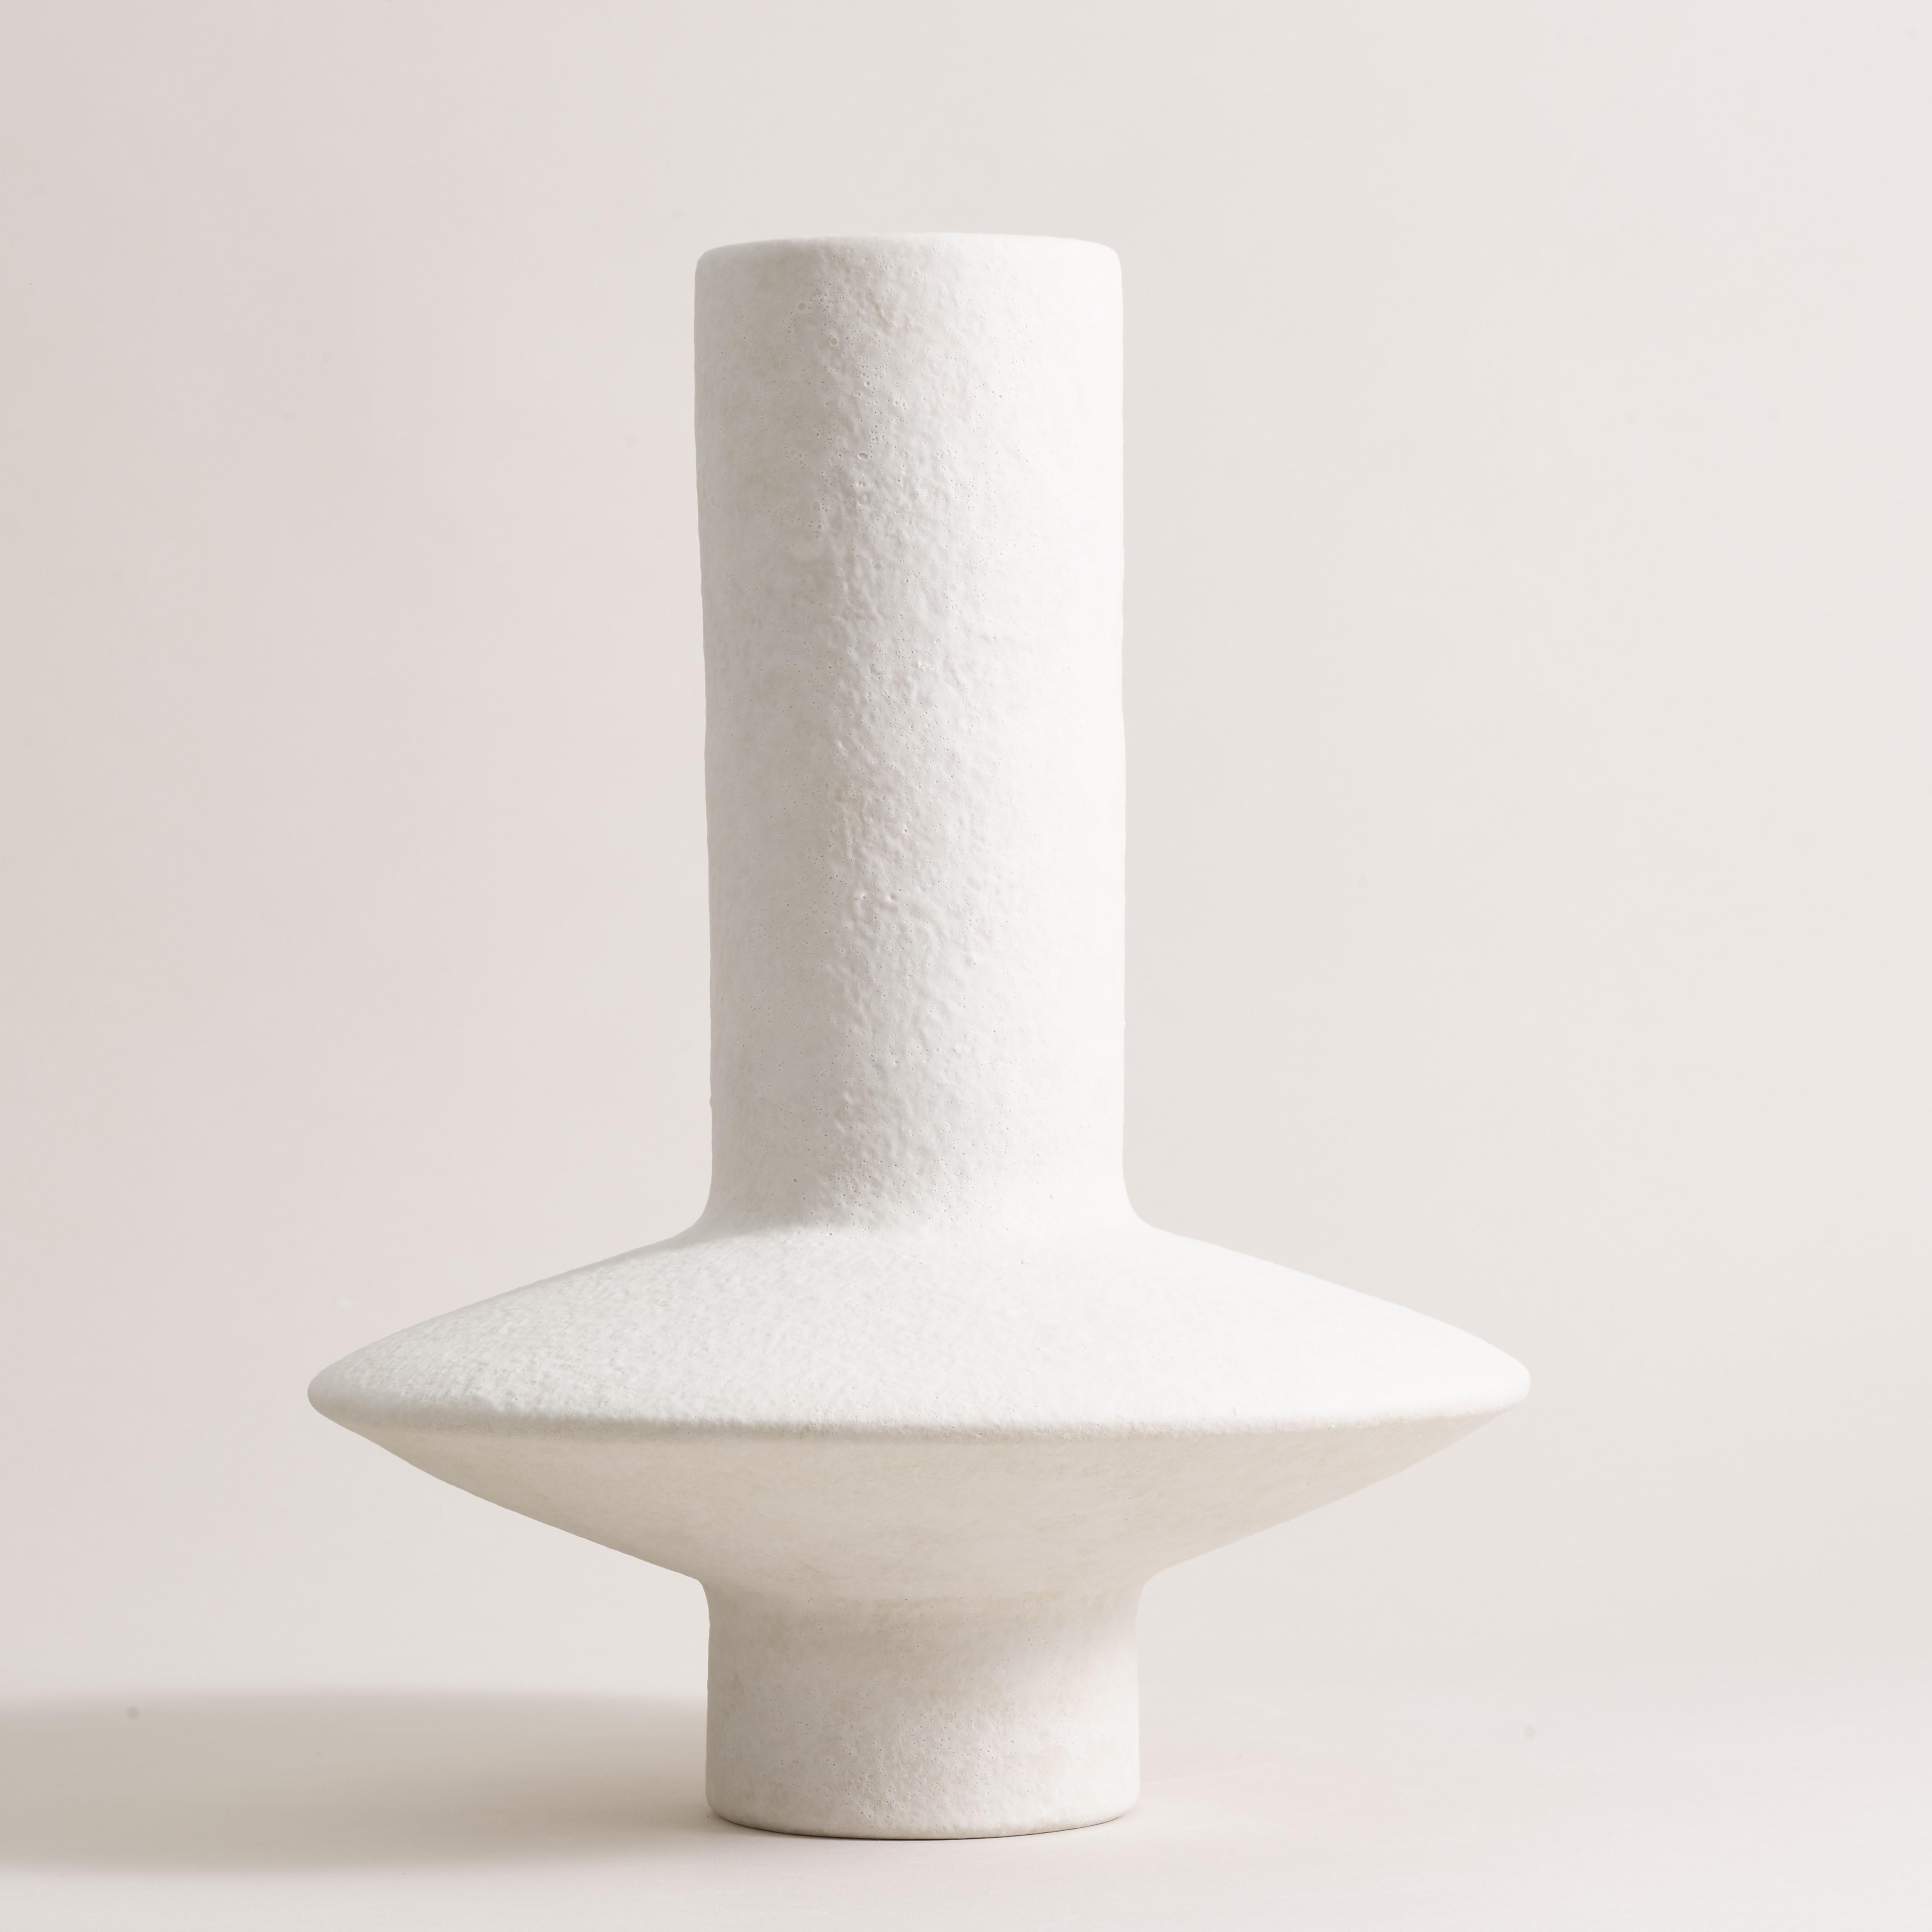 Handcrafted vase 072 by Lovebuch
Dimensions: Ø 28 x H 34 cm
Materials: Sandstone, porcelain, handcrafted piece.

Katia works with wood and clay, these raw, powerfully expressive materials are shaped to create a poetry of objects that inhabit our